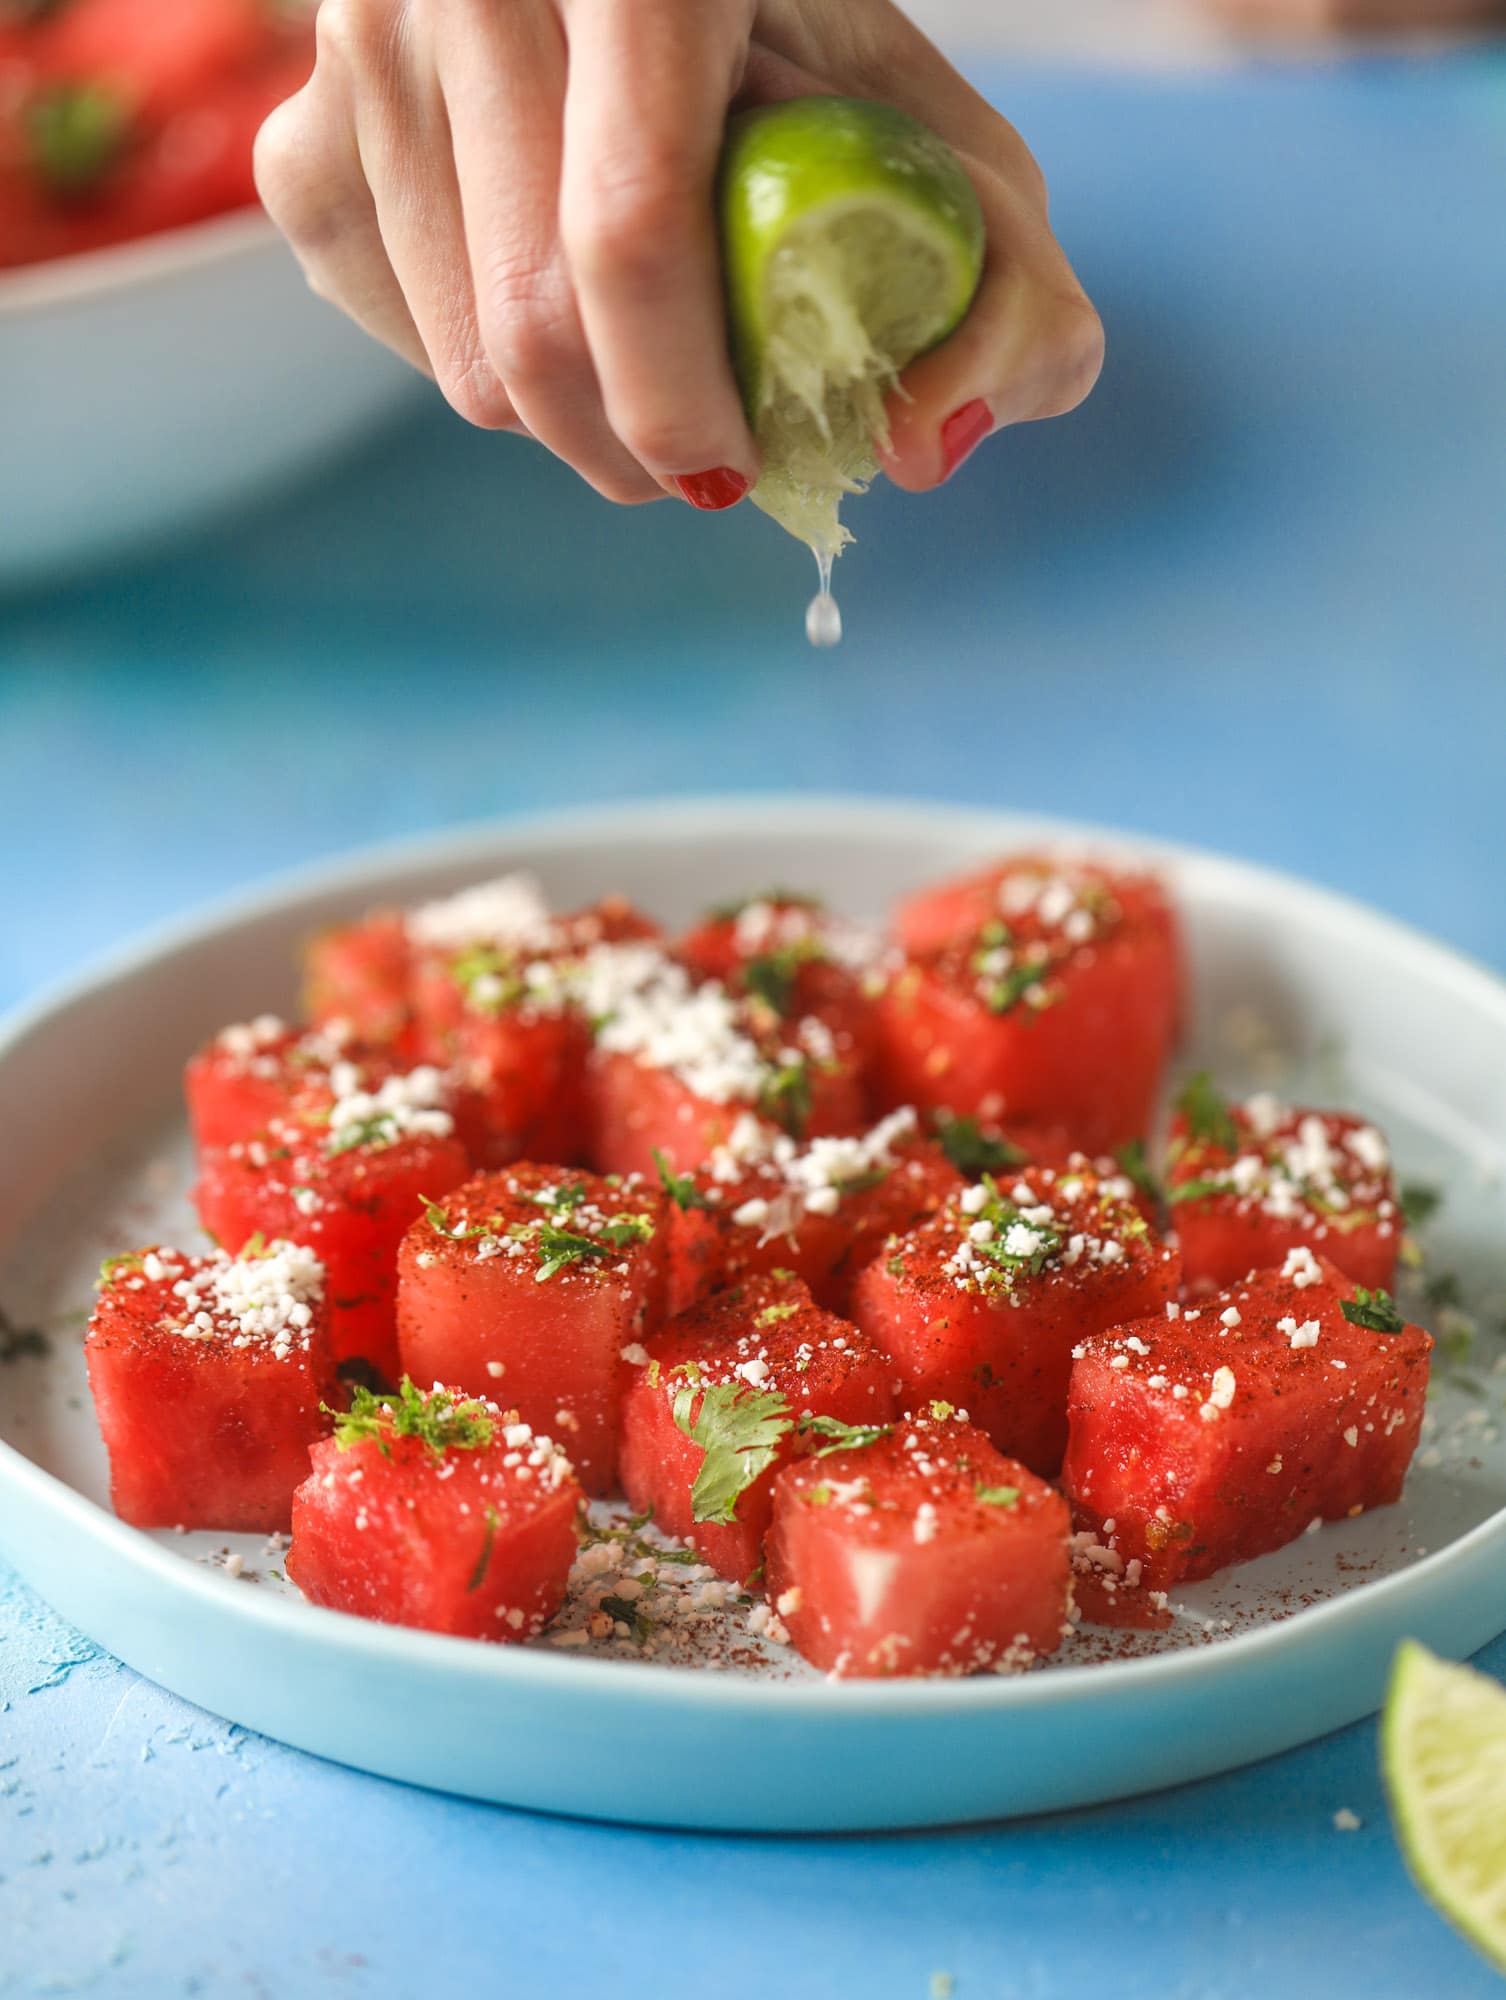 This chili lime watermelon is the perfect summer snack! It's savory and sweet with crumbled cotija cheese and lots of lime. Delish!